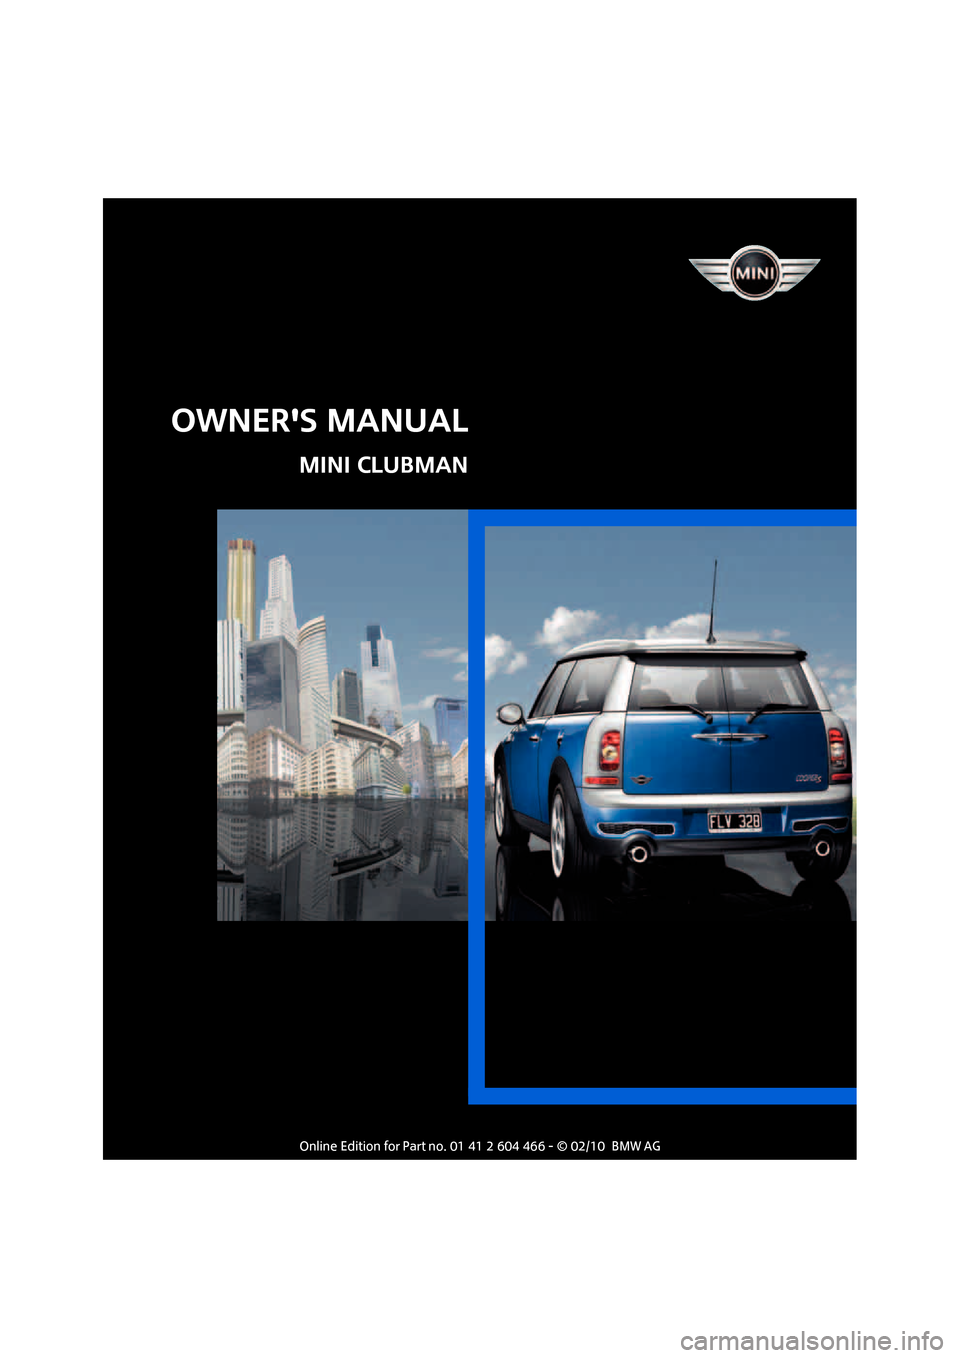 MINI Clubman 2010  Owners Manual (Mini Connected)   
OWNERS MANUAL
MINI CLUBMAN 